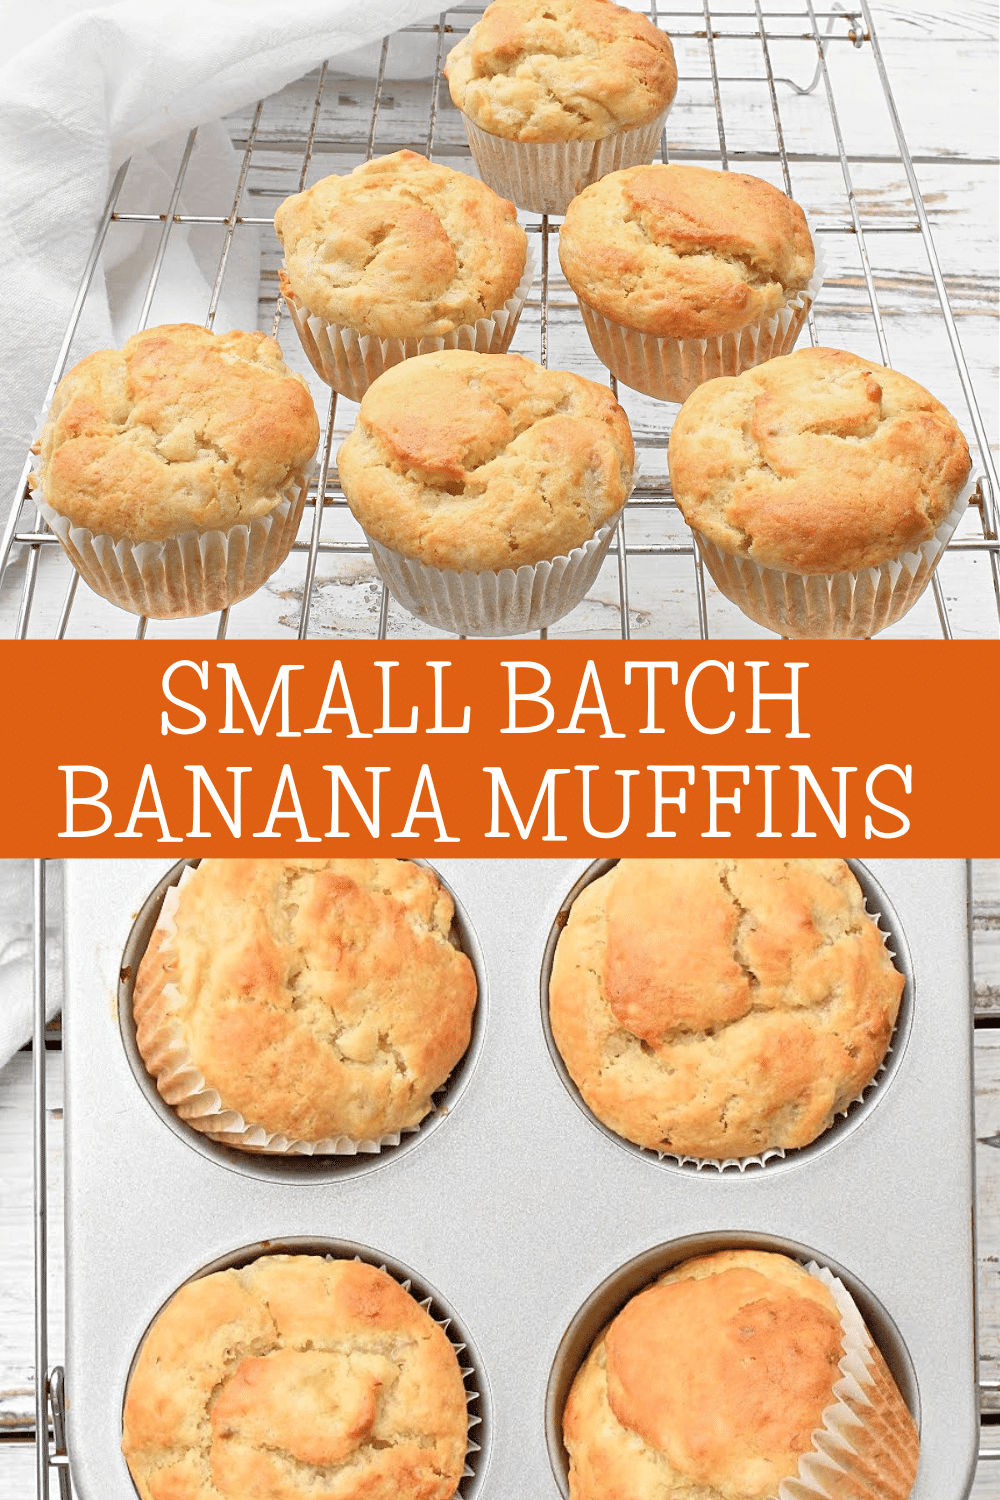 Small Batch Banana Muffins ~ Vegan Recipe ~ A half-dozen banana muffins! These dairy-free muffins are easy to make with just 2-3 overripe bananas. Perfect for a mid-morning or afternoon snack! via @thiswifecooks